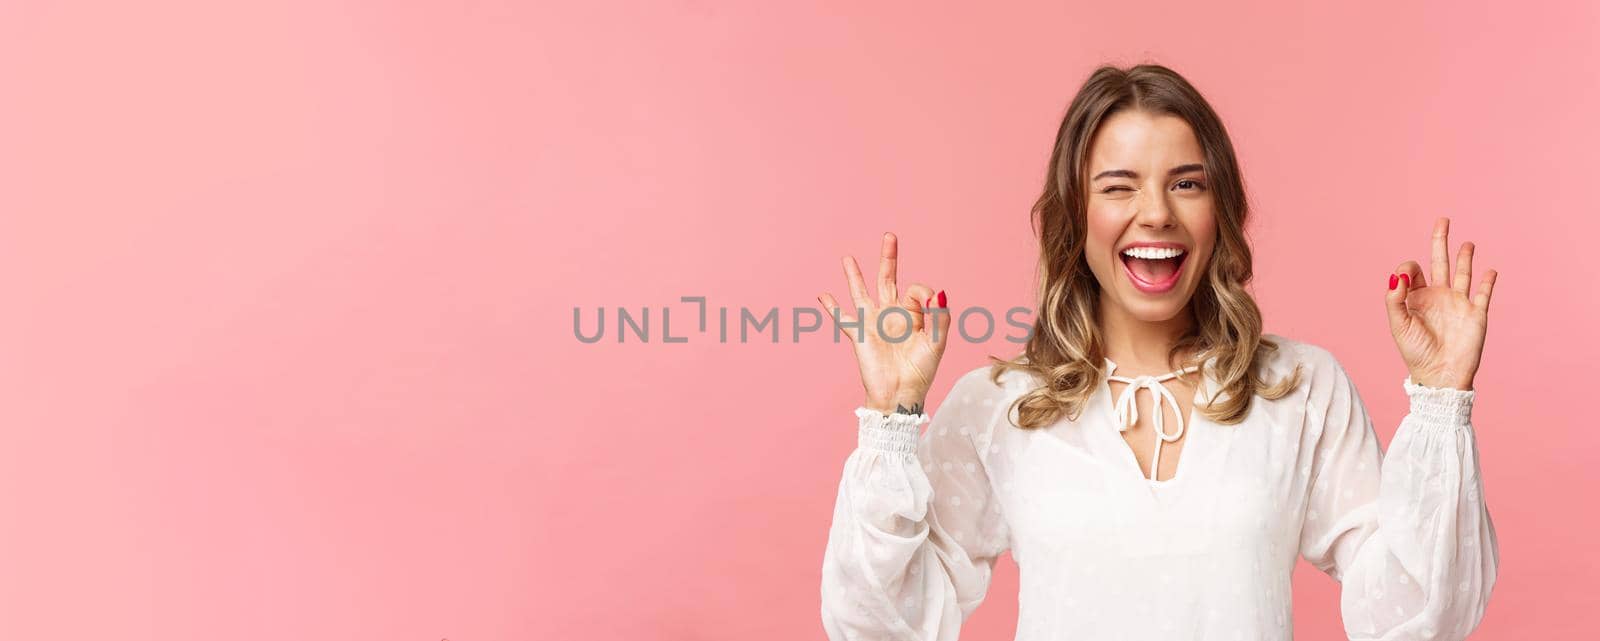 Close-up portrait of beautiful blond girl in white dress guarantee you will enjoy this event, show okay sign, confirm everything excellent, wink and smiling carefree, standing pink background.